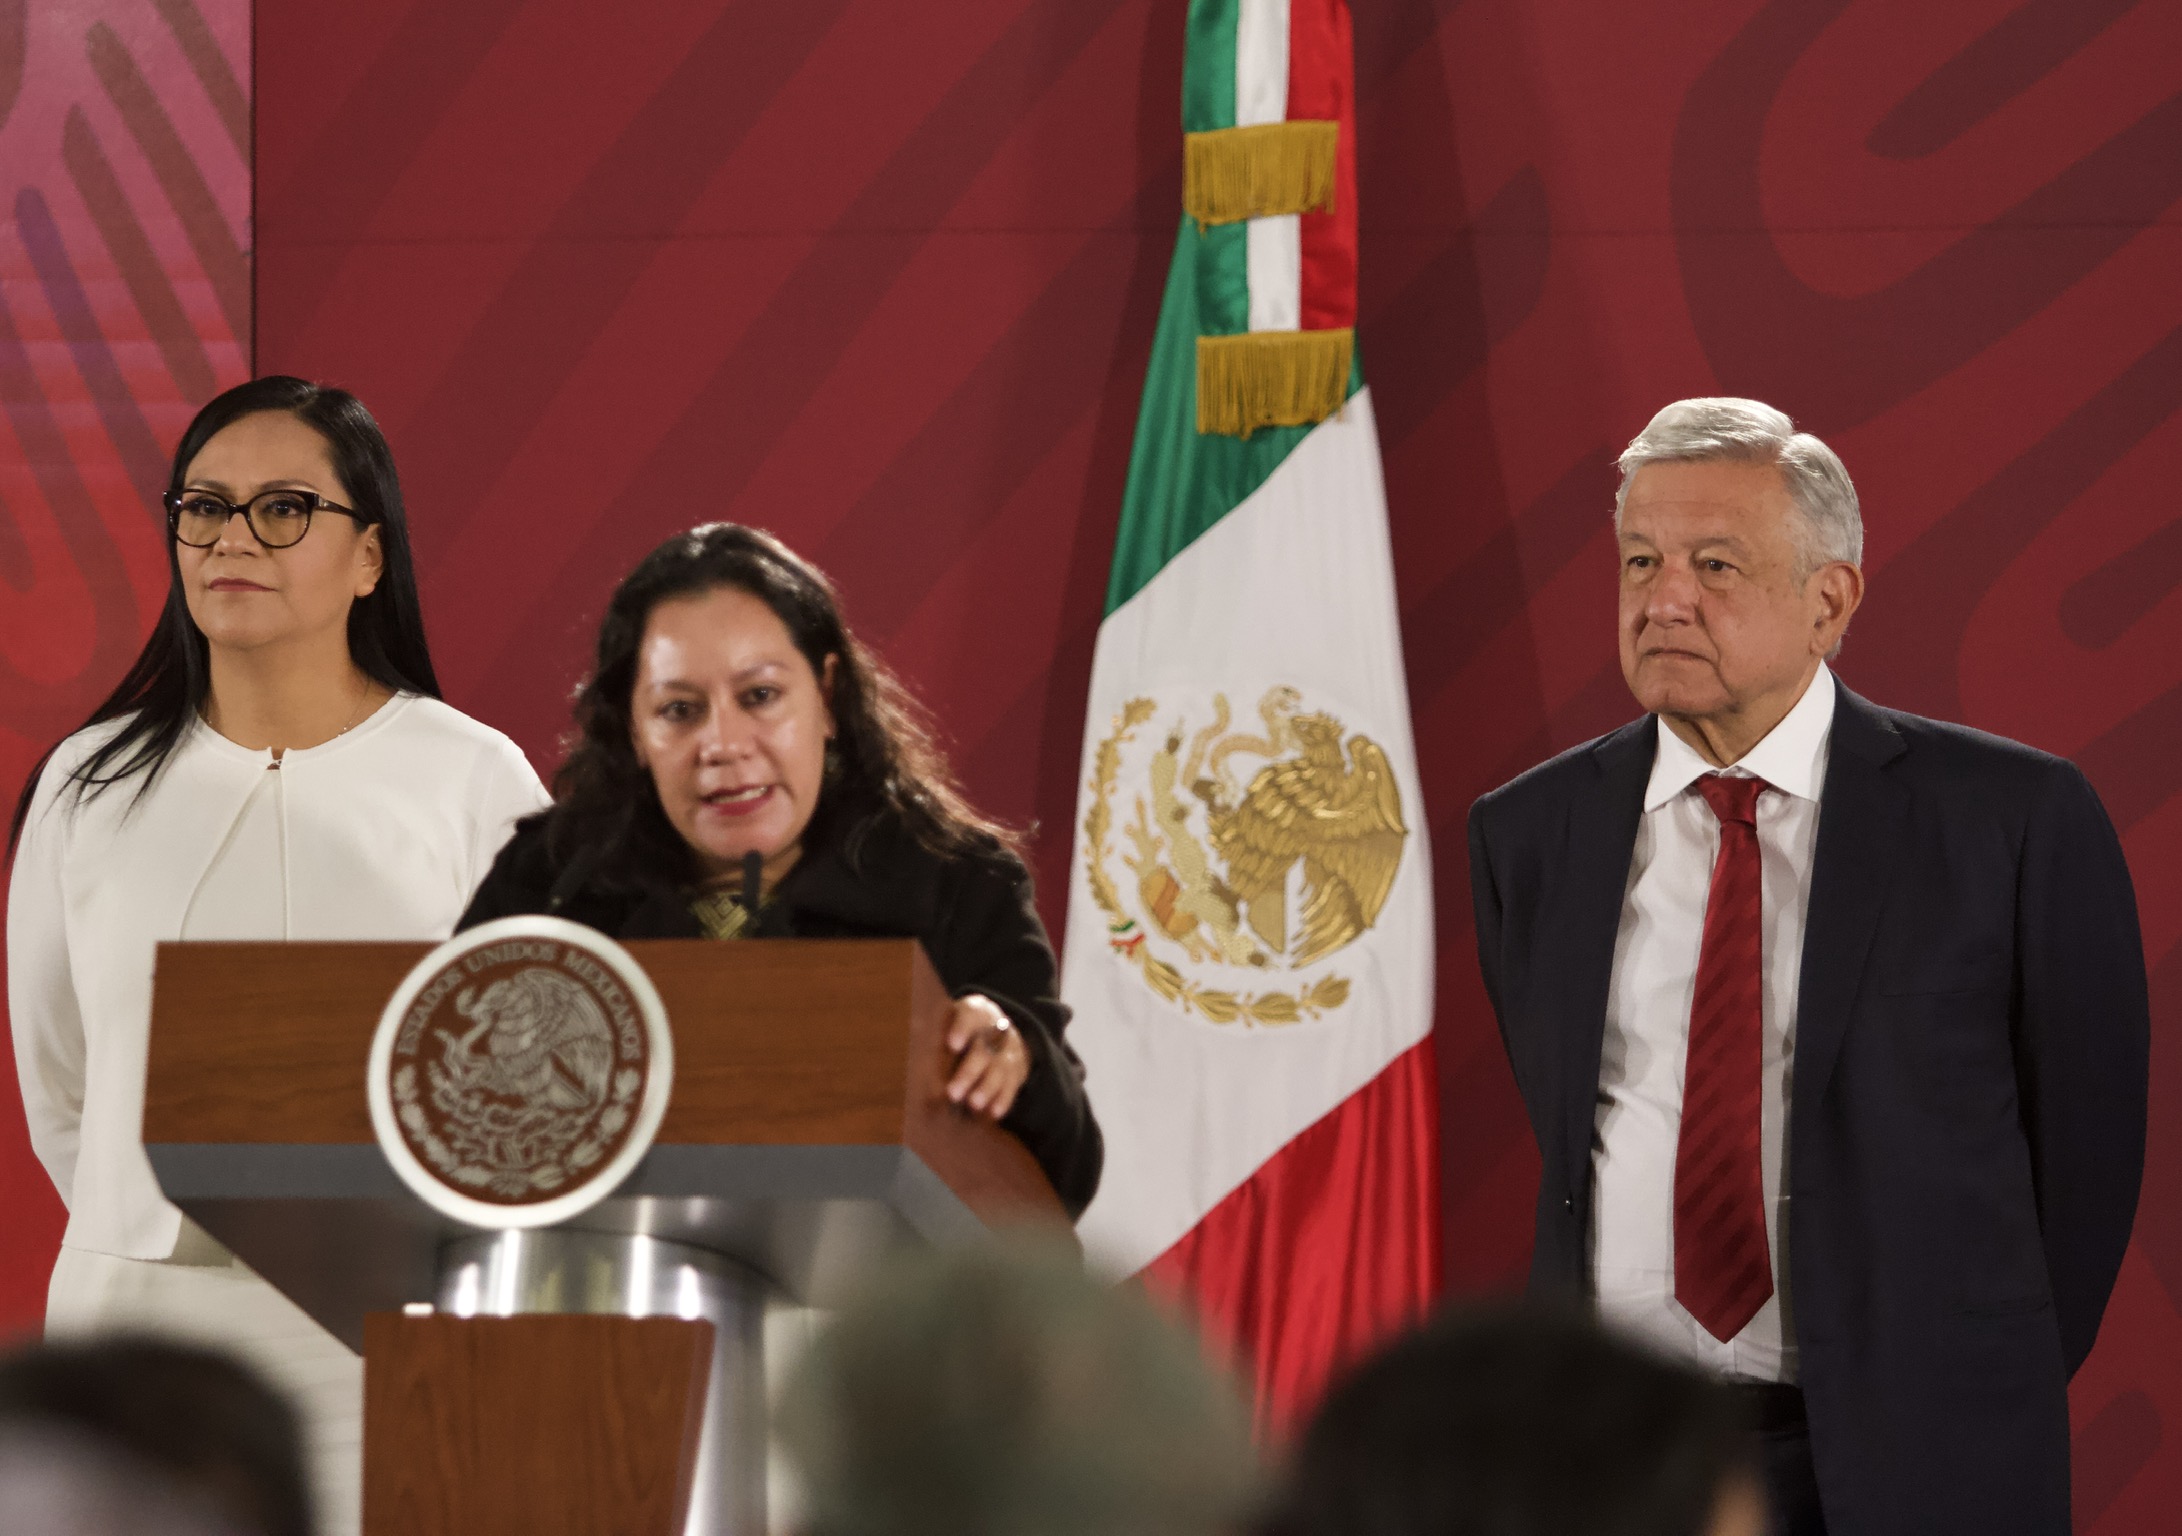 AMLO discusses giving scholarships to use Telethon centers